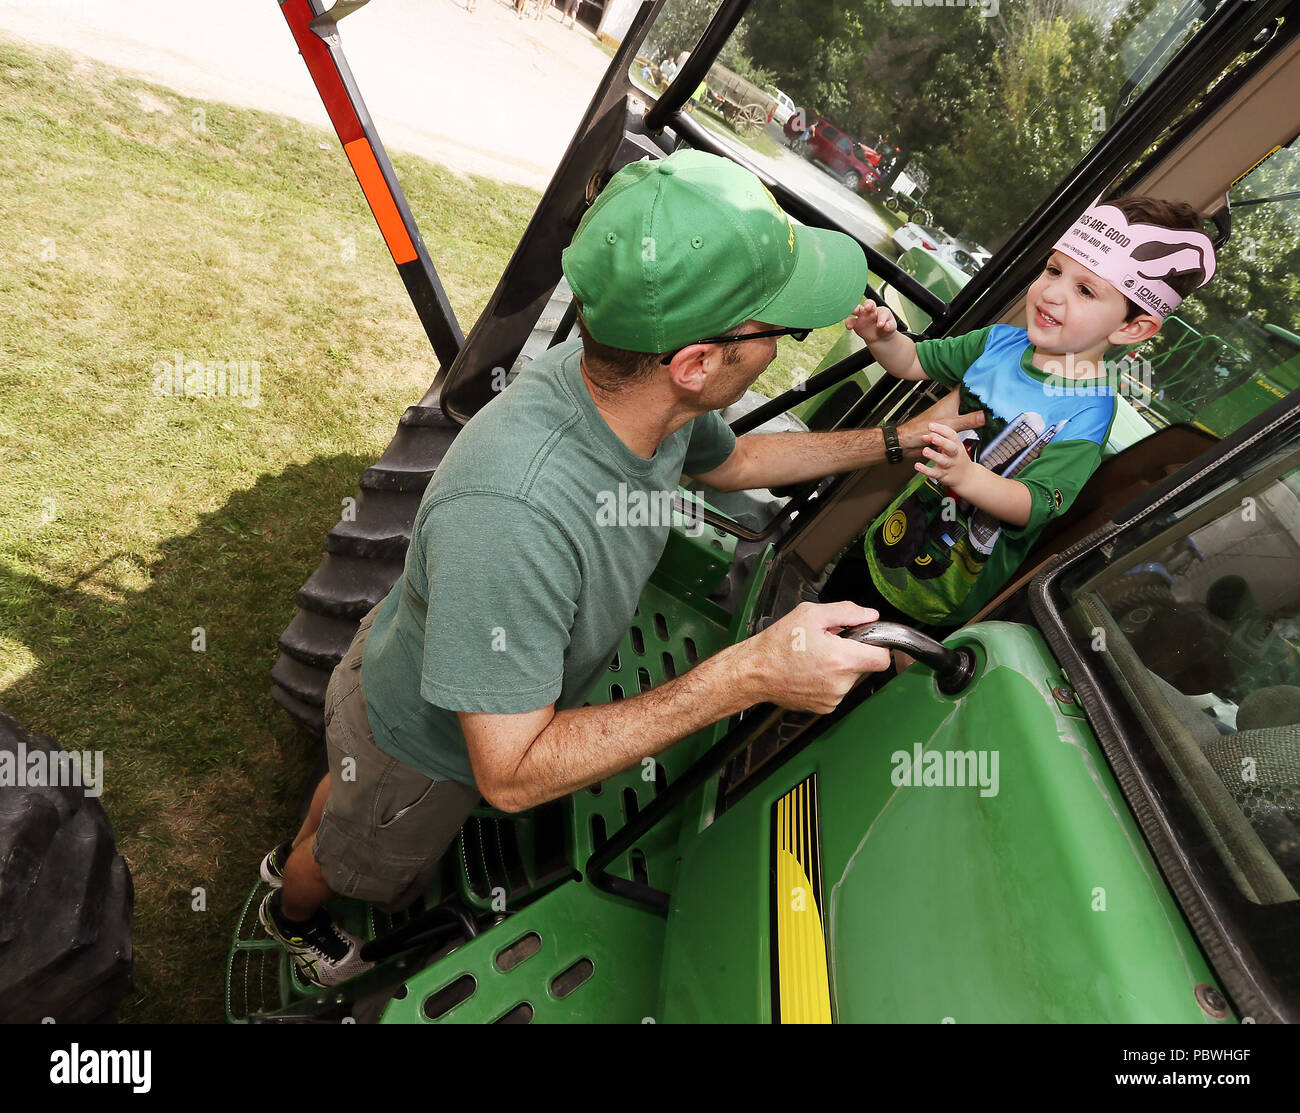 Davenport, Iowa, USA. 29th July, 2018. Bryan Miller, left and his son Carson Miller explore the John Deere 9220 Tractor during the Open Farm Day at the Robb and Jennifer Ewoldt farm located west of Davenport, Iowa Sunday, July 29, 2018. Credit: Kevin E. Schmidt/Quad-City Times/ZUMA Wire/Alamy Live News Stock Photo